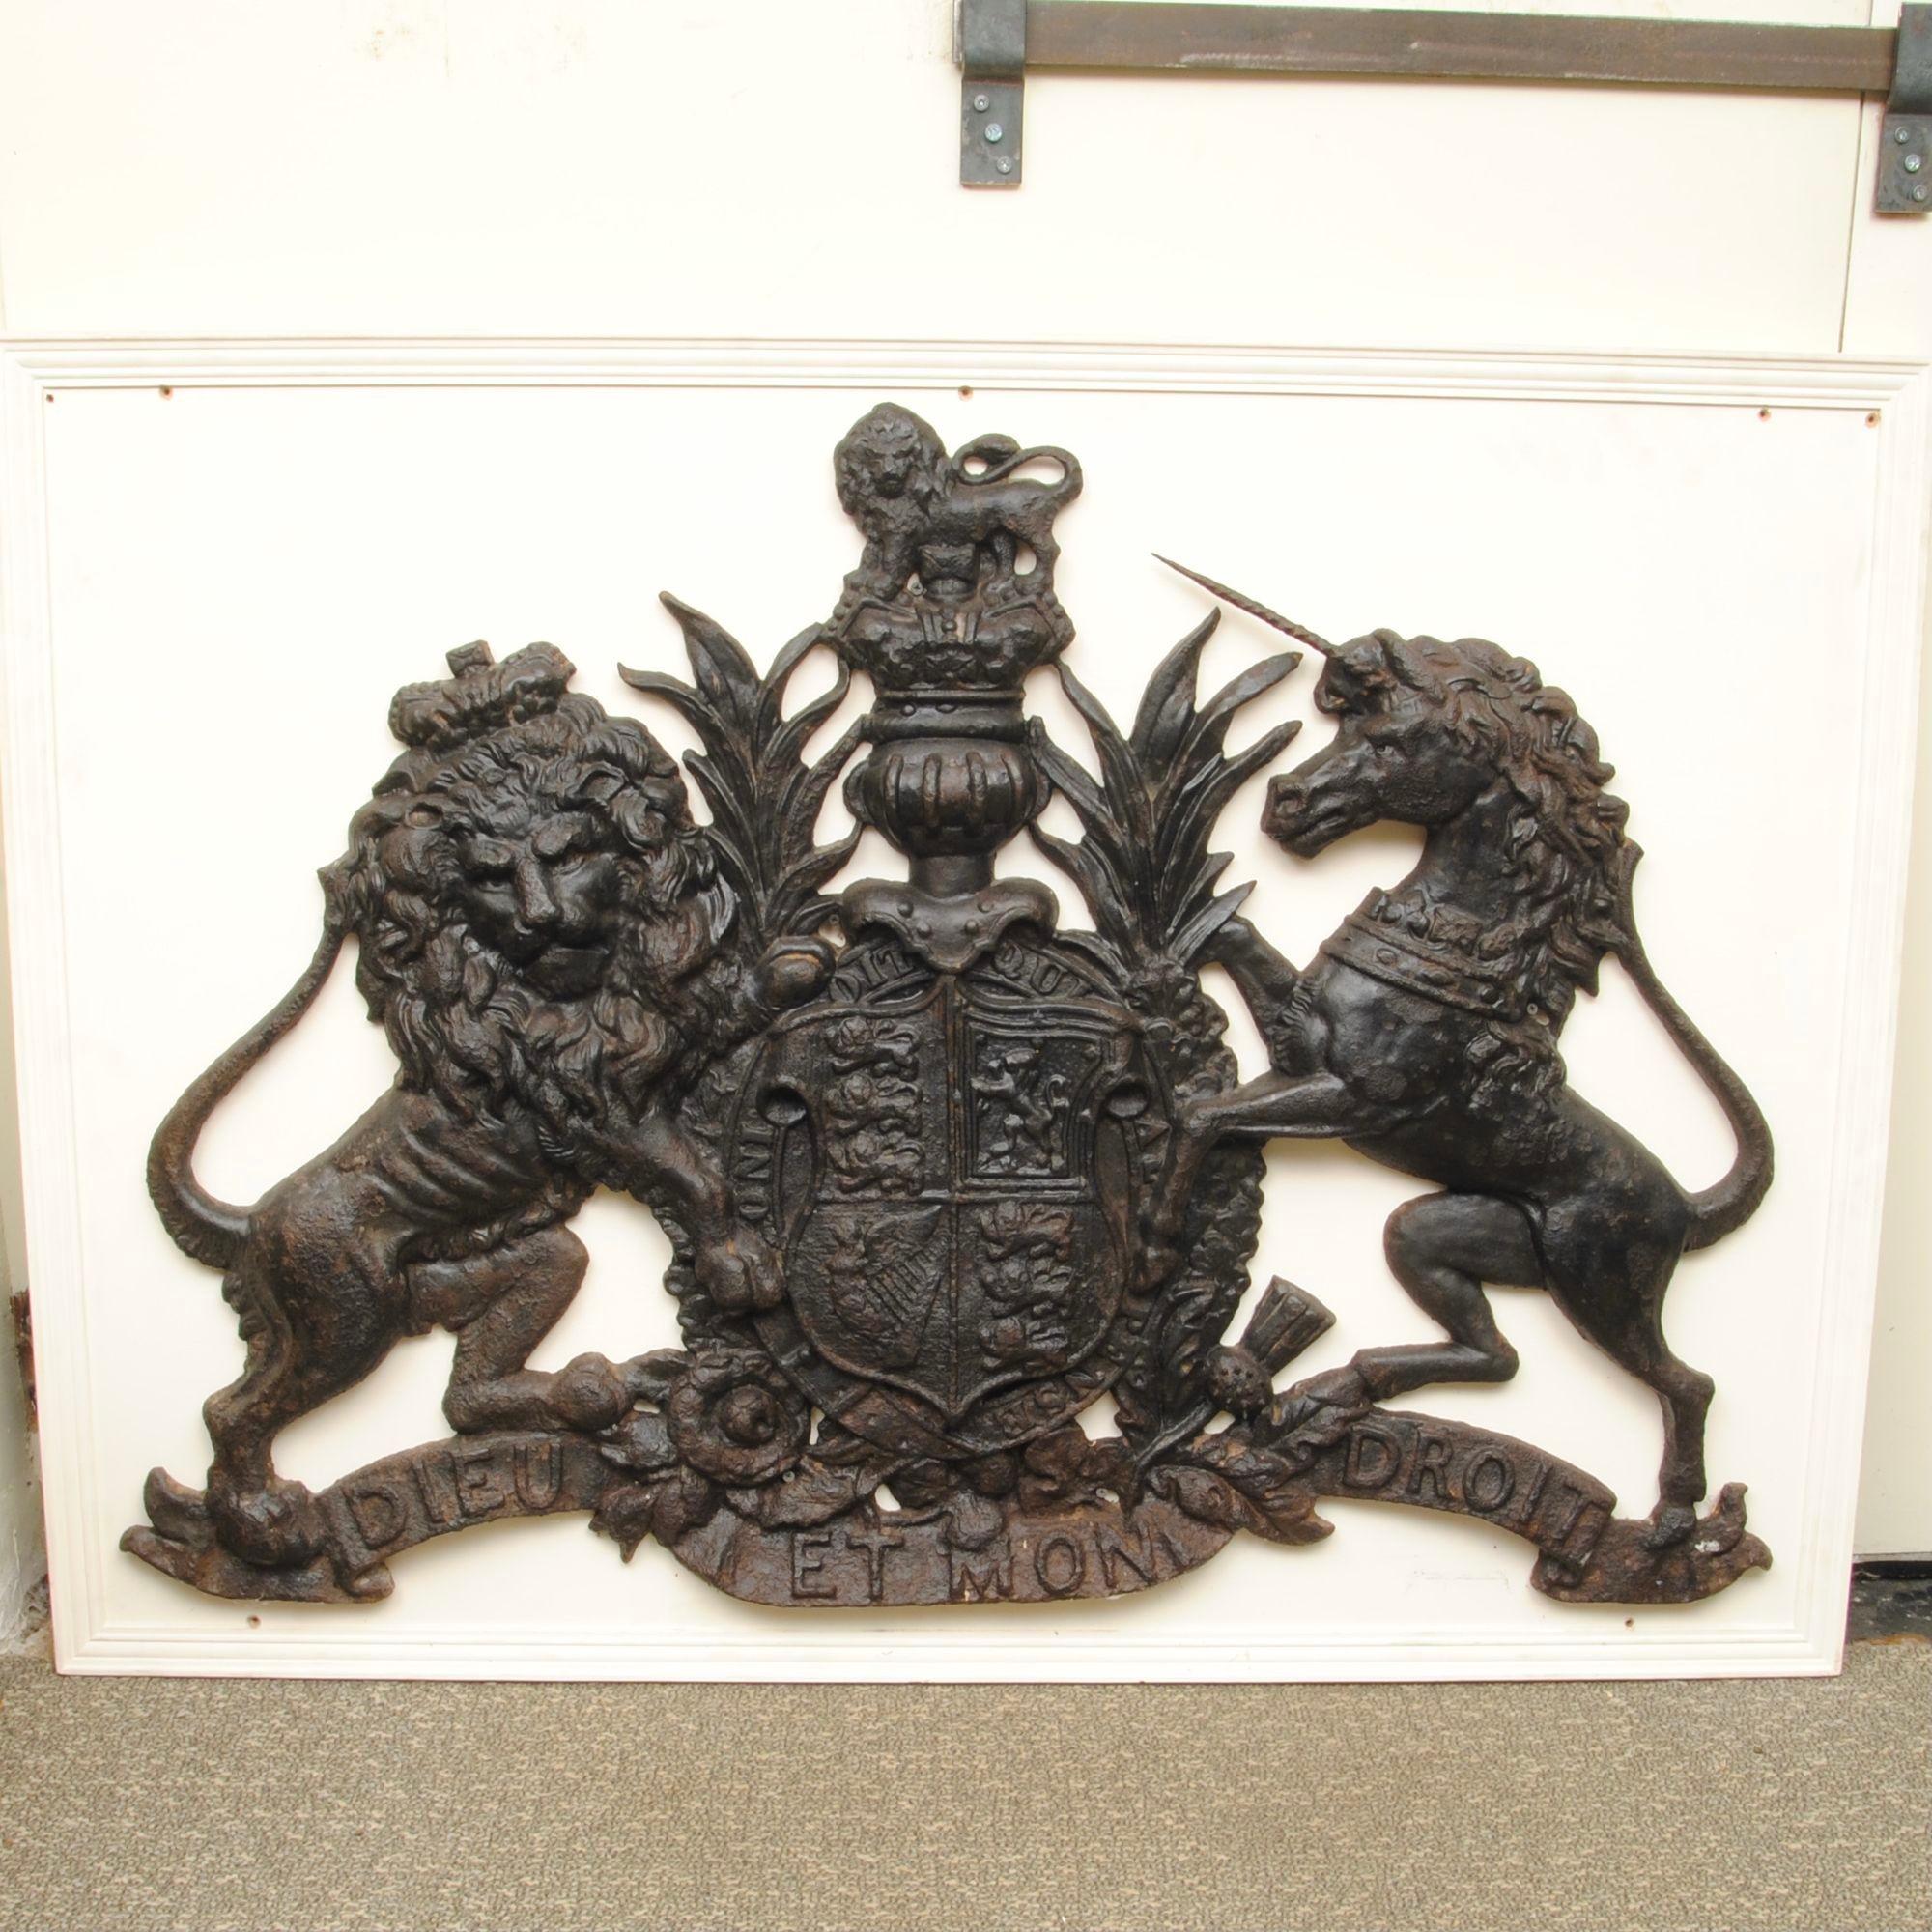 A fine cast iron royal coat of arms for Queen Victoria, this well cast coat of arms would have been in a courtroom or similar.
We have mounted it on a strong wooden board to make hanging of this easy.
Mid-19th Century.